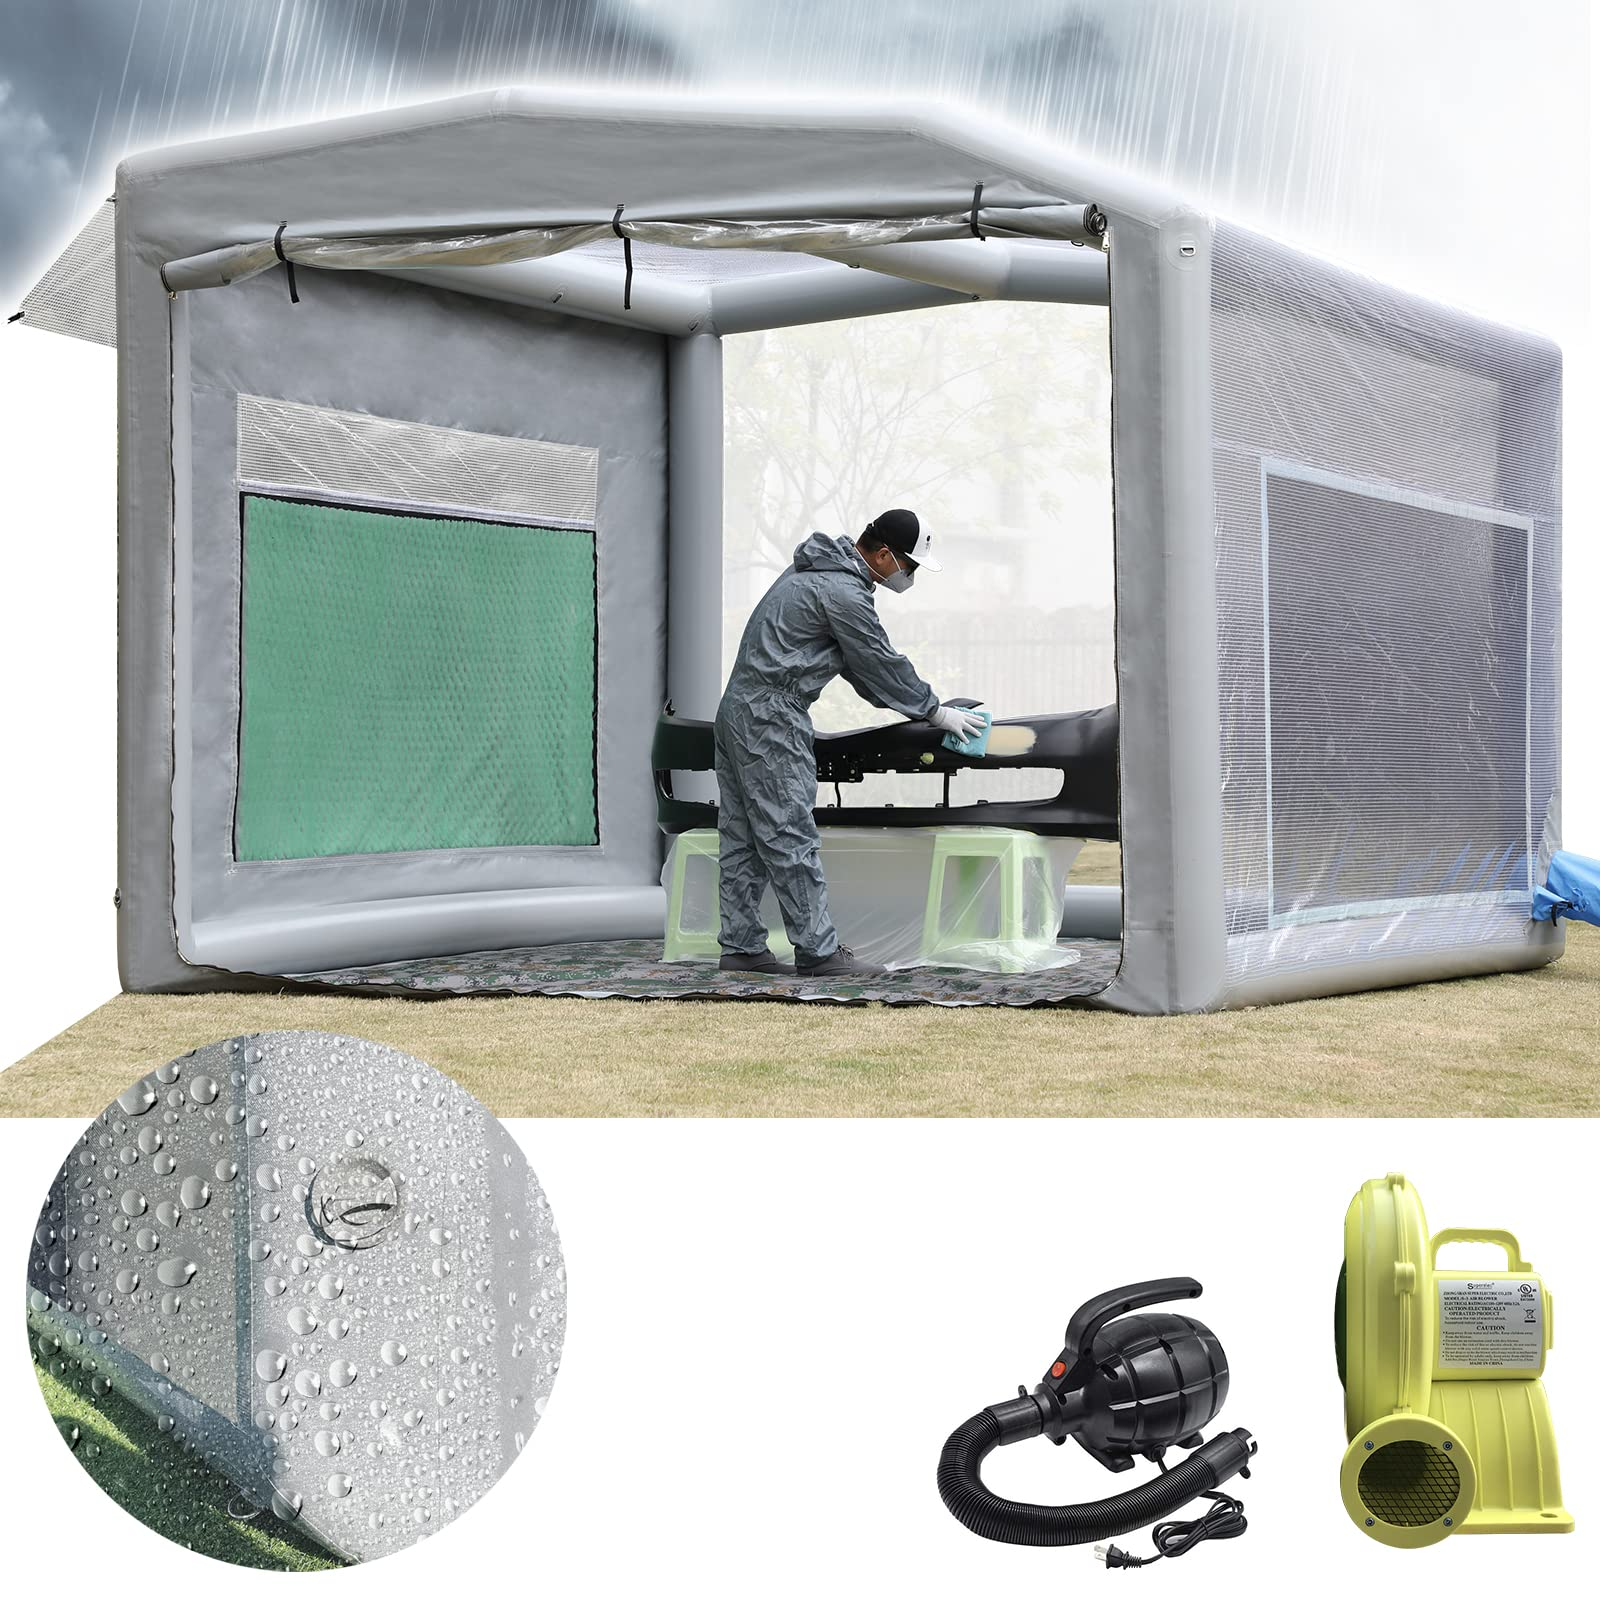 New Version Sewinfla Airtight Waterproof Paint Booth 13x11.5x10ft with a 750W Blower for Ventilation Durable Portable Paint Booth Perfect Solution for Overspray Problem